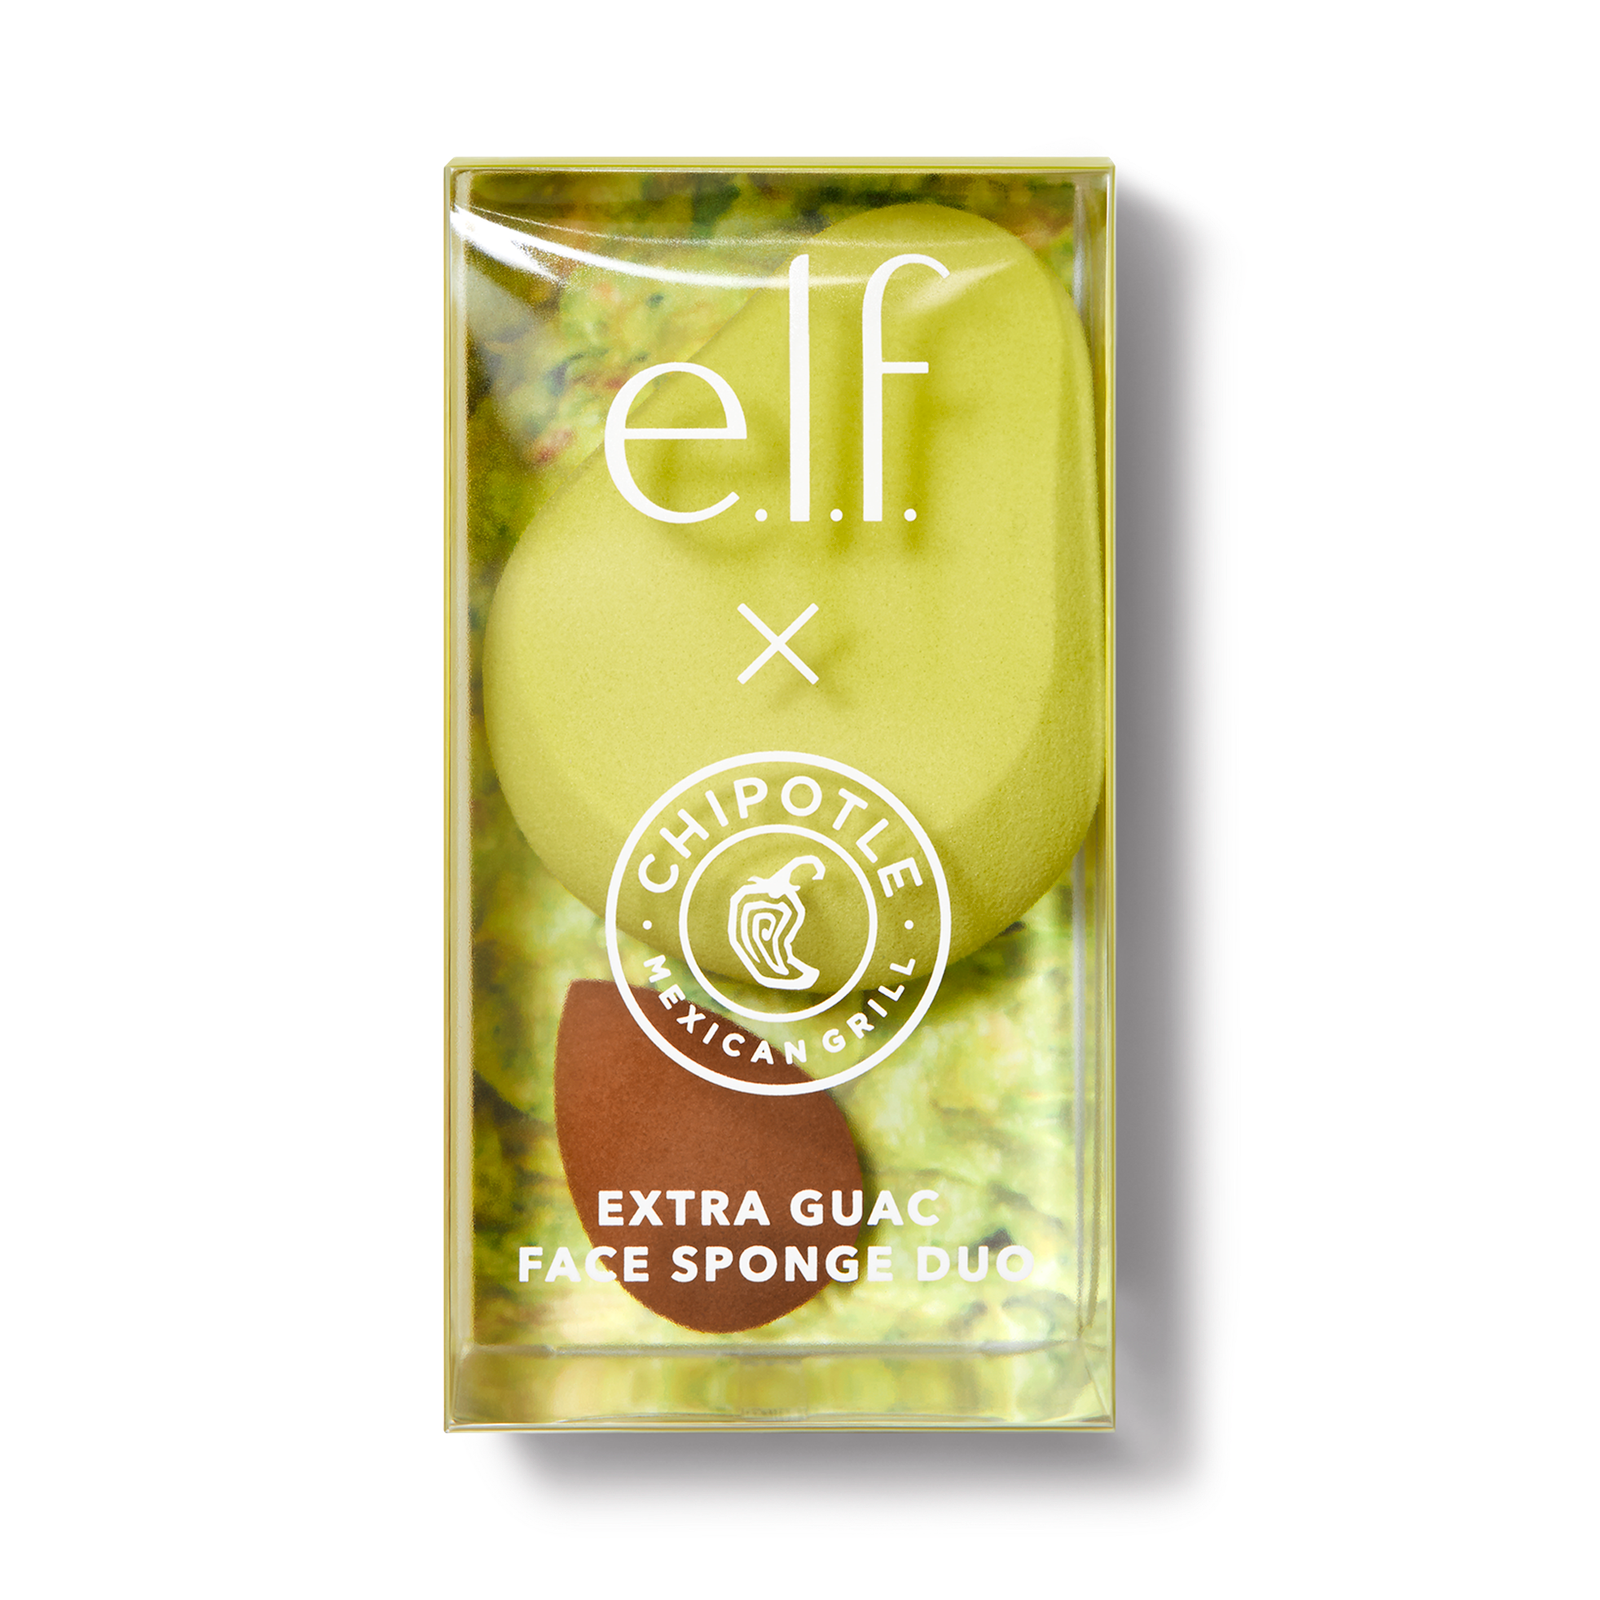 OMG—E.L.F’s Next Chipotle Collab Is Here & Guac Is Not Extra